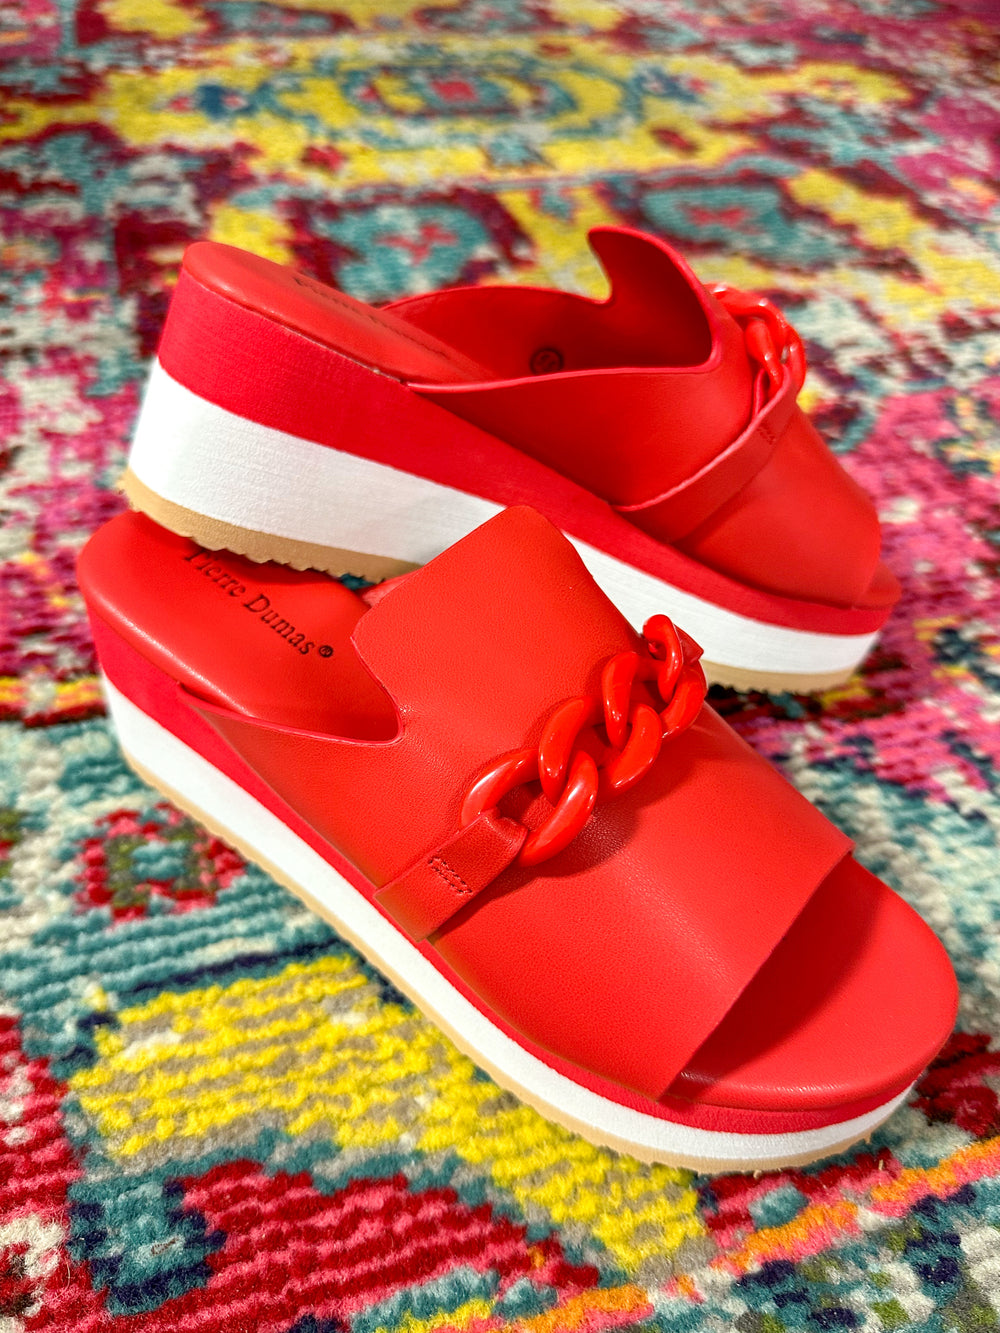 Can't Be Defeated Platform Wedges - Red